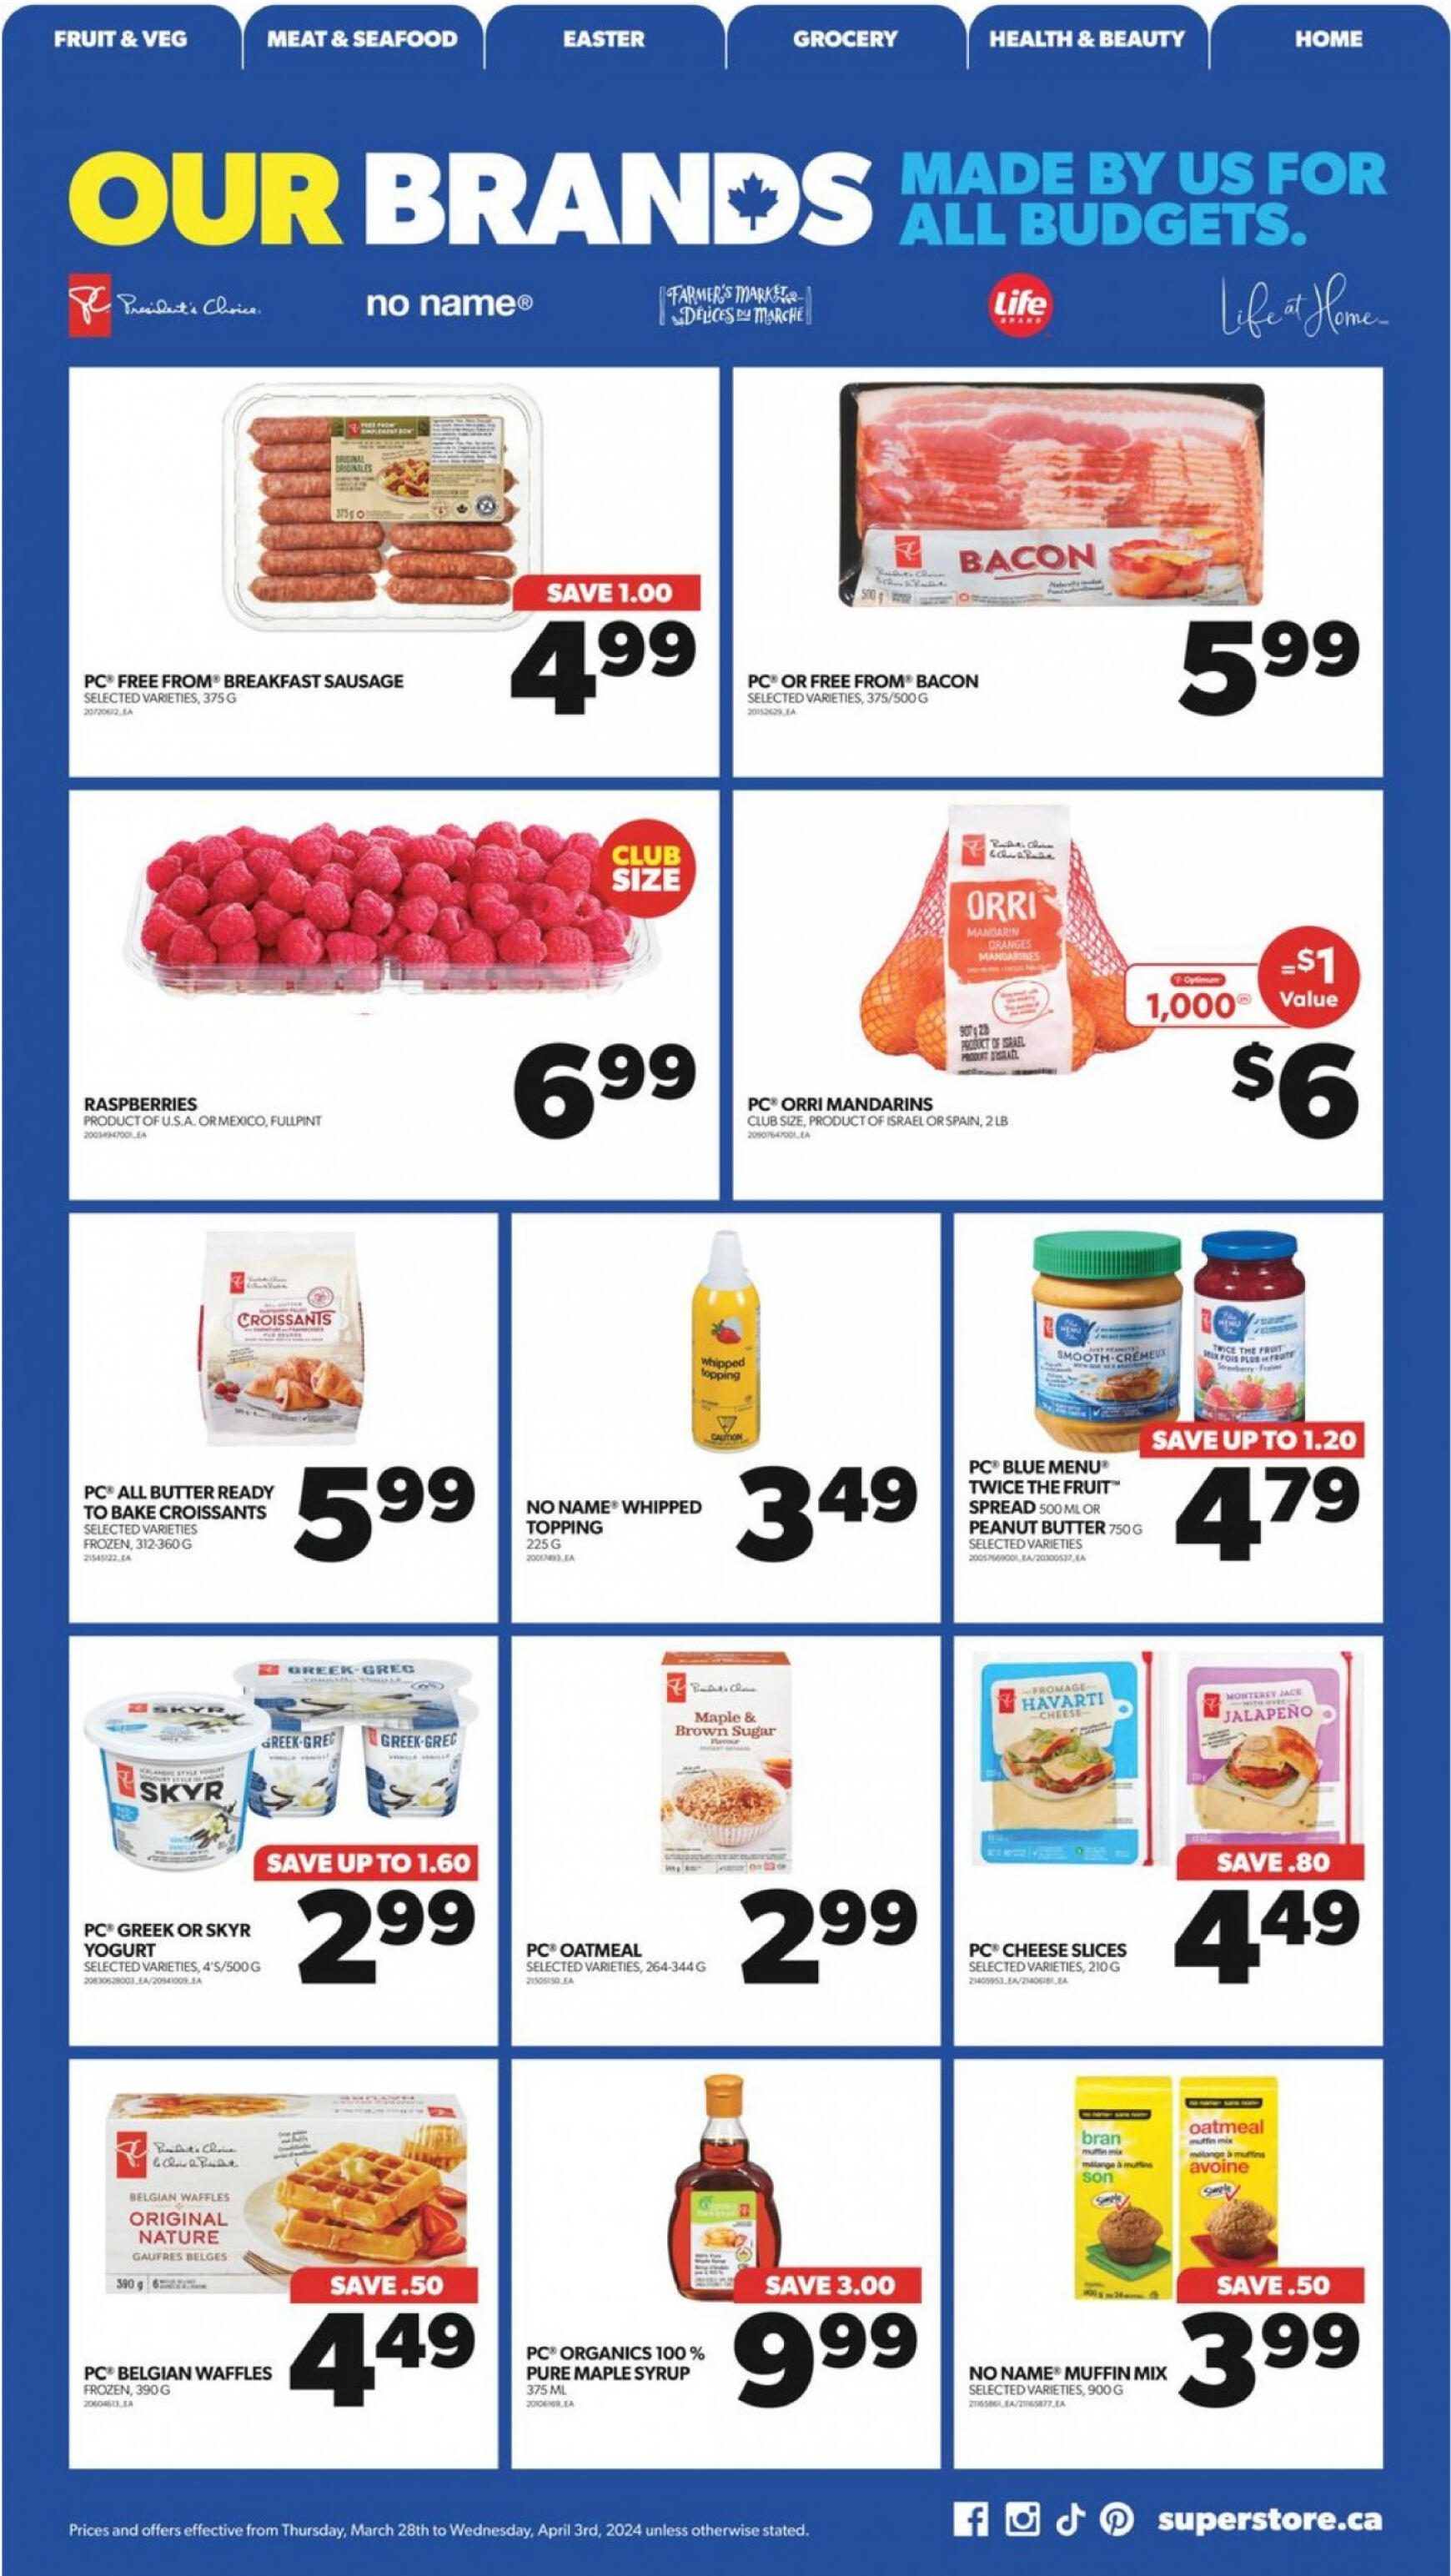 real-canadian-superstore - Real Canadian Superstore flyer current 28.03. - 03.04. - page: 16